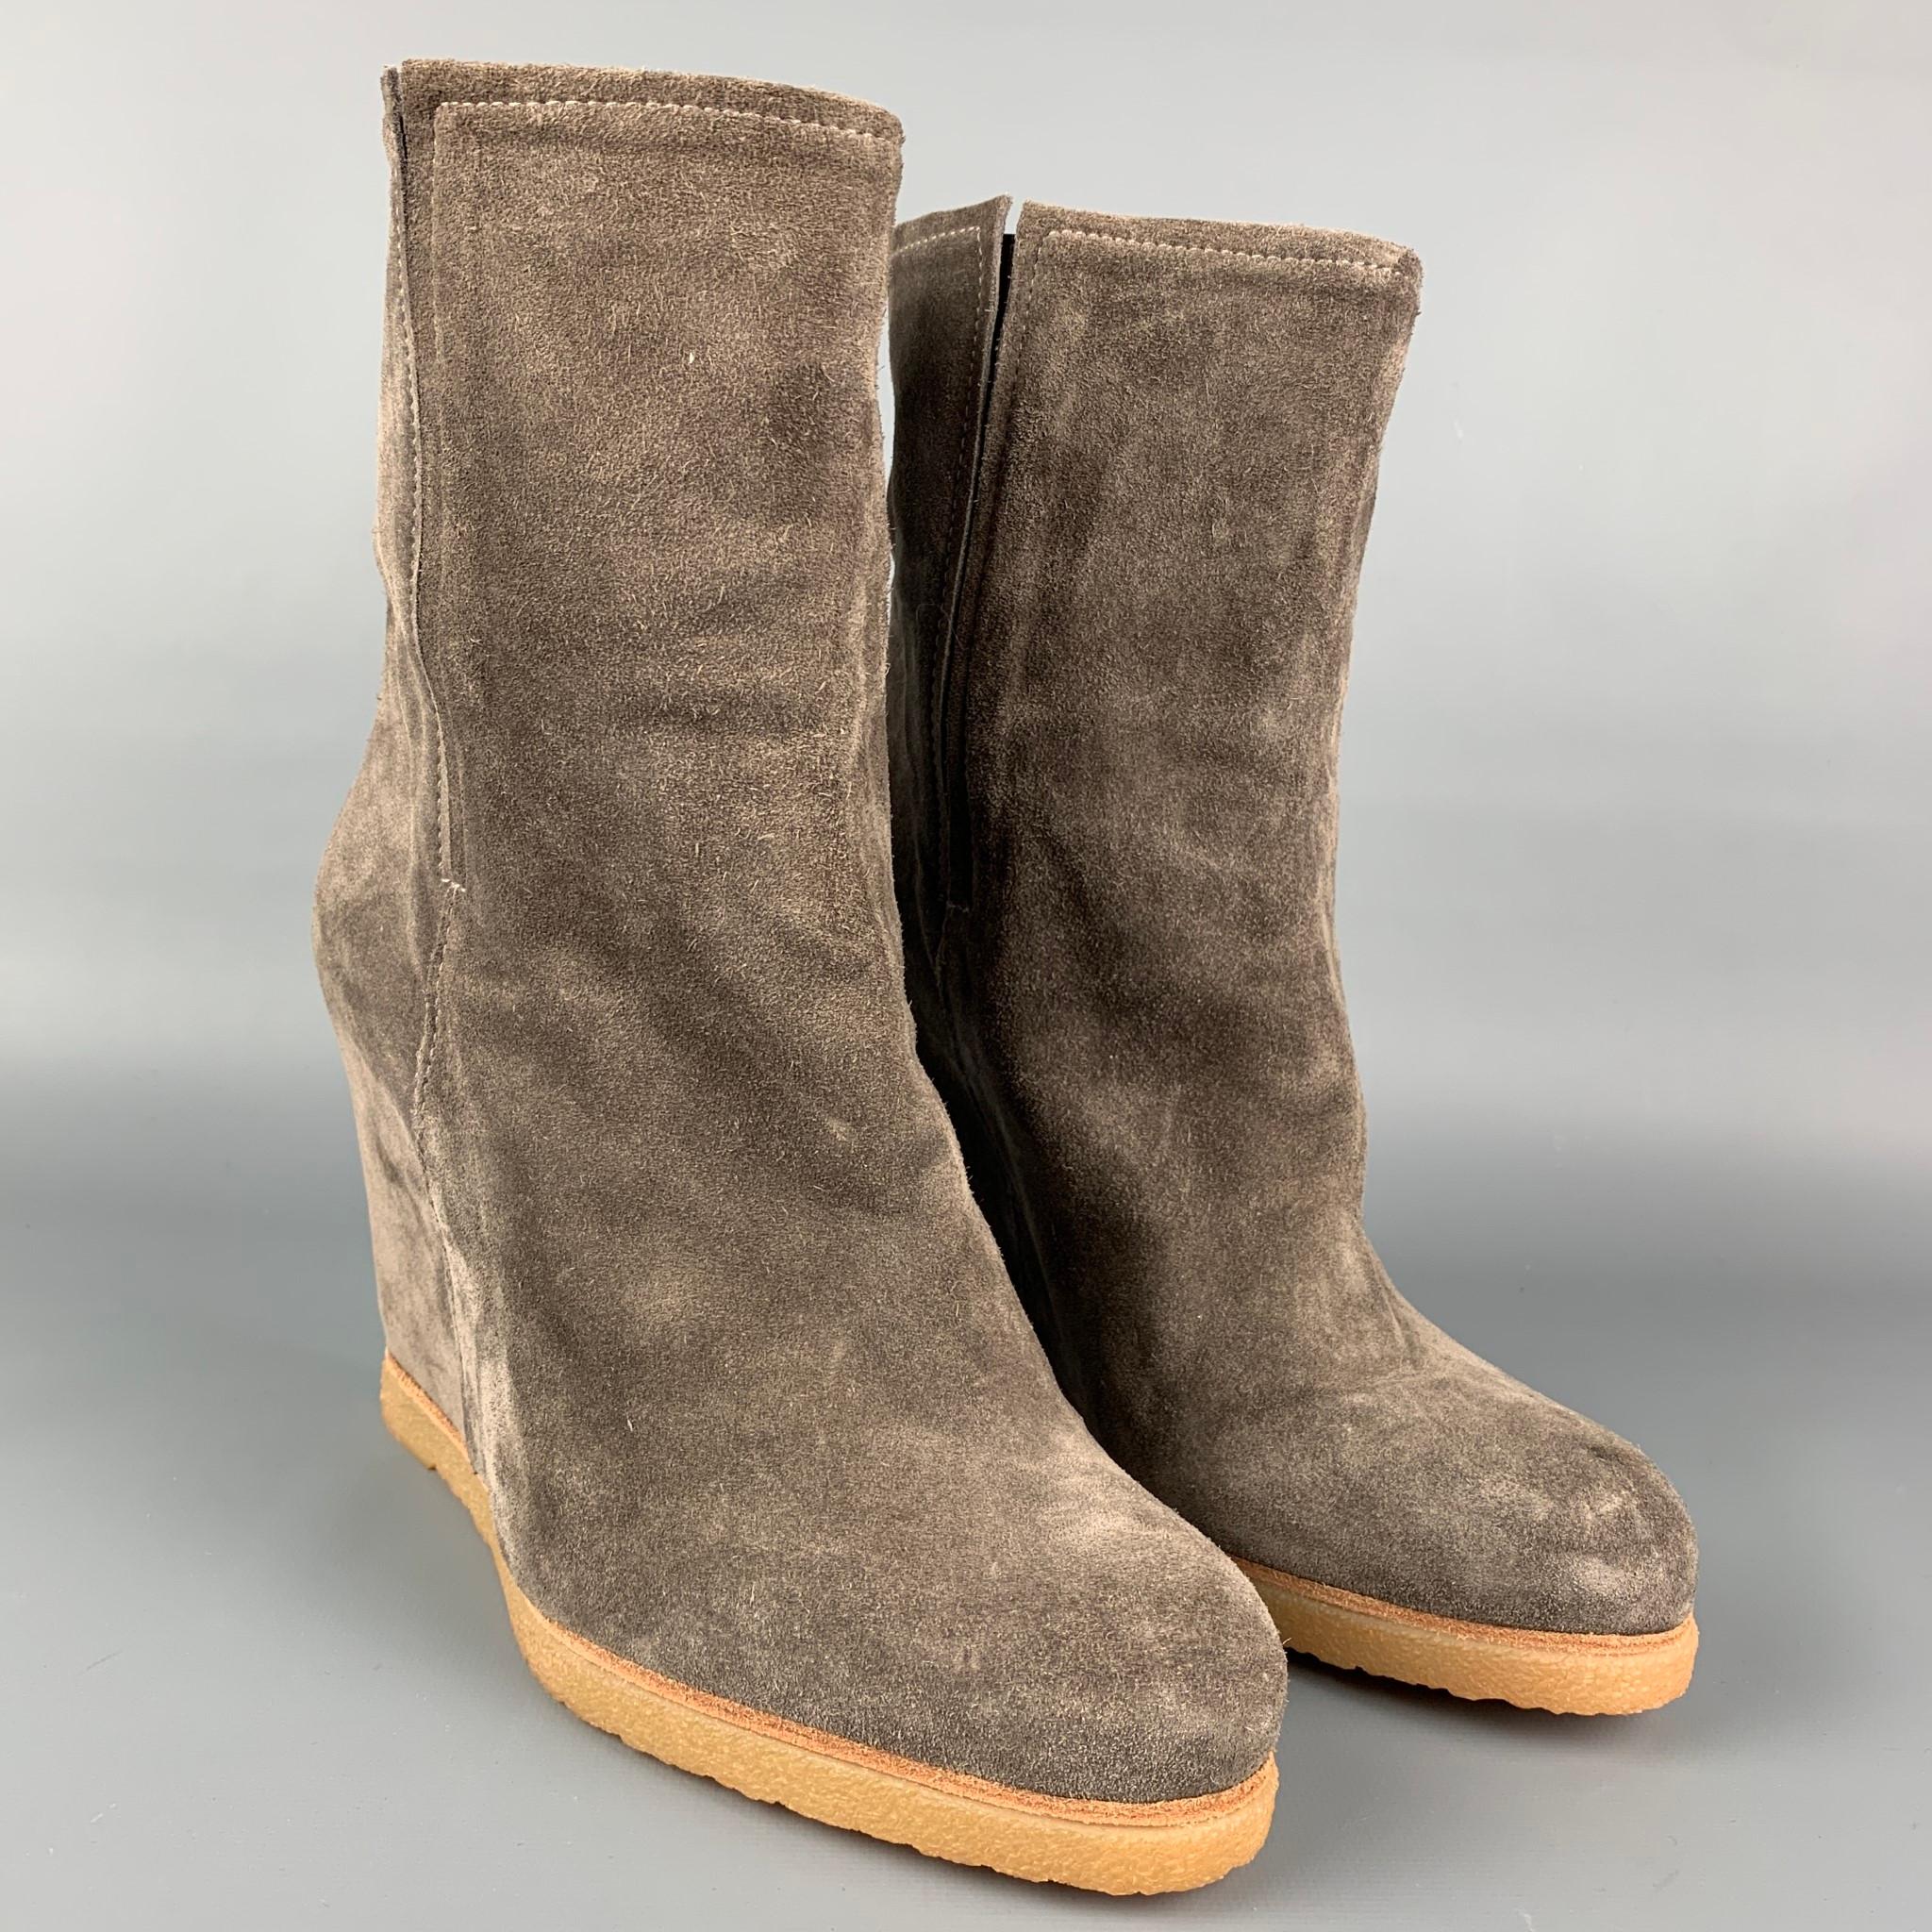 STUART WEITZMAN boots comes in a taupe suede featuring a elastic panel and a wedge heel. 

Very Good Pre-Owned Condition.
Original Retail Price: $475.00

Measurements:

Heel: 4.5 in. 